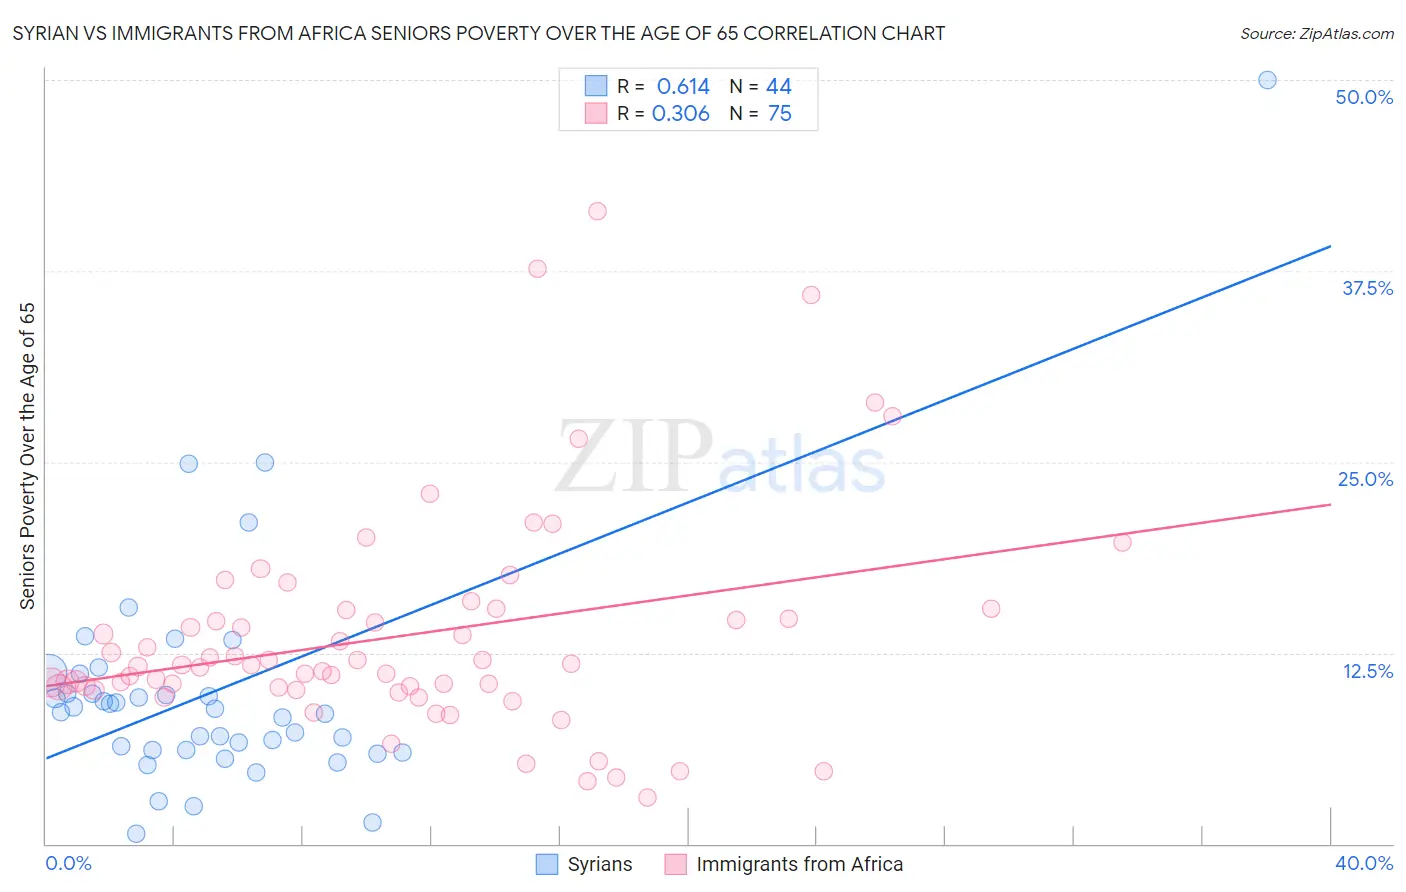 Syrian vs Immigrants from Africa Seniors Poverty Over the Age of 65